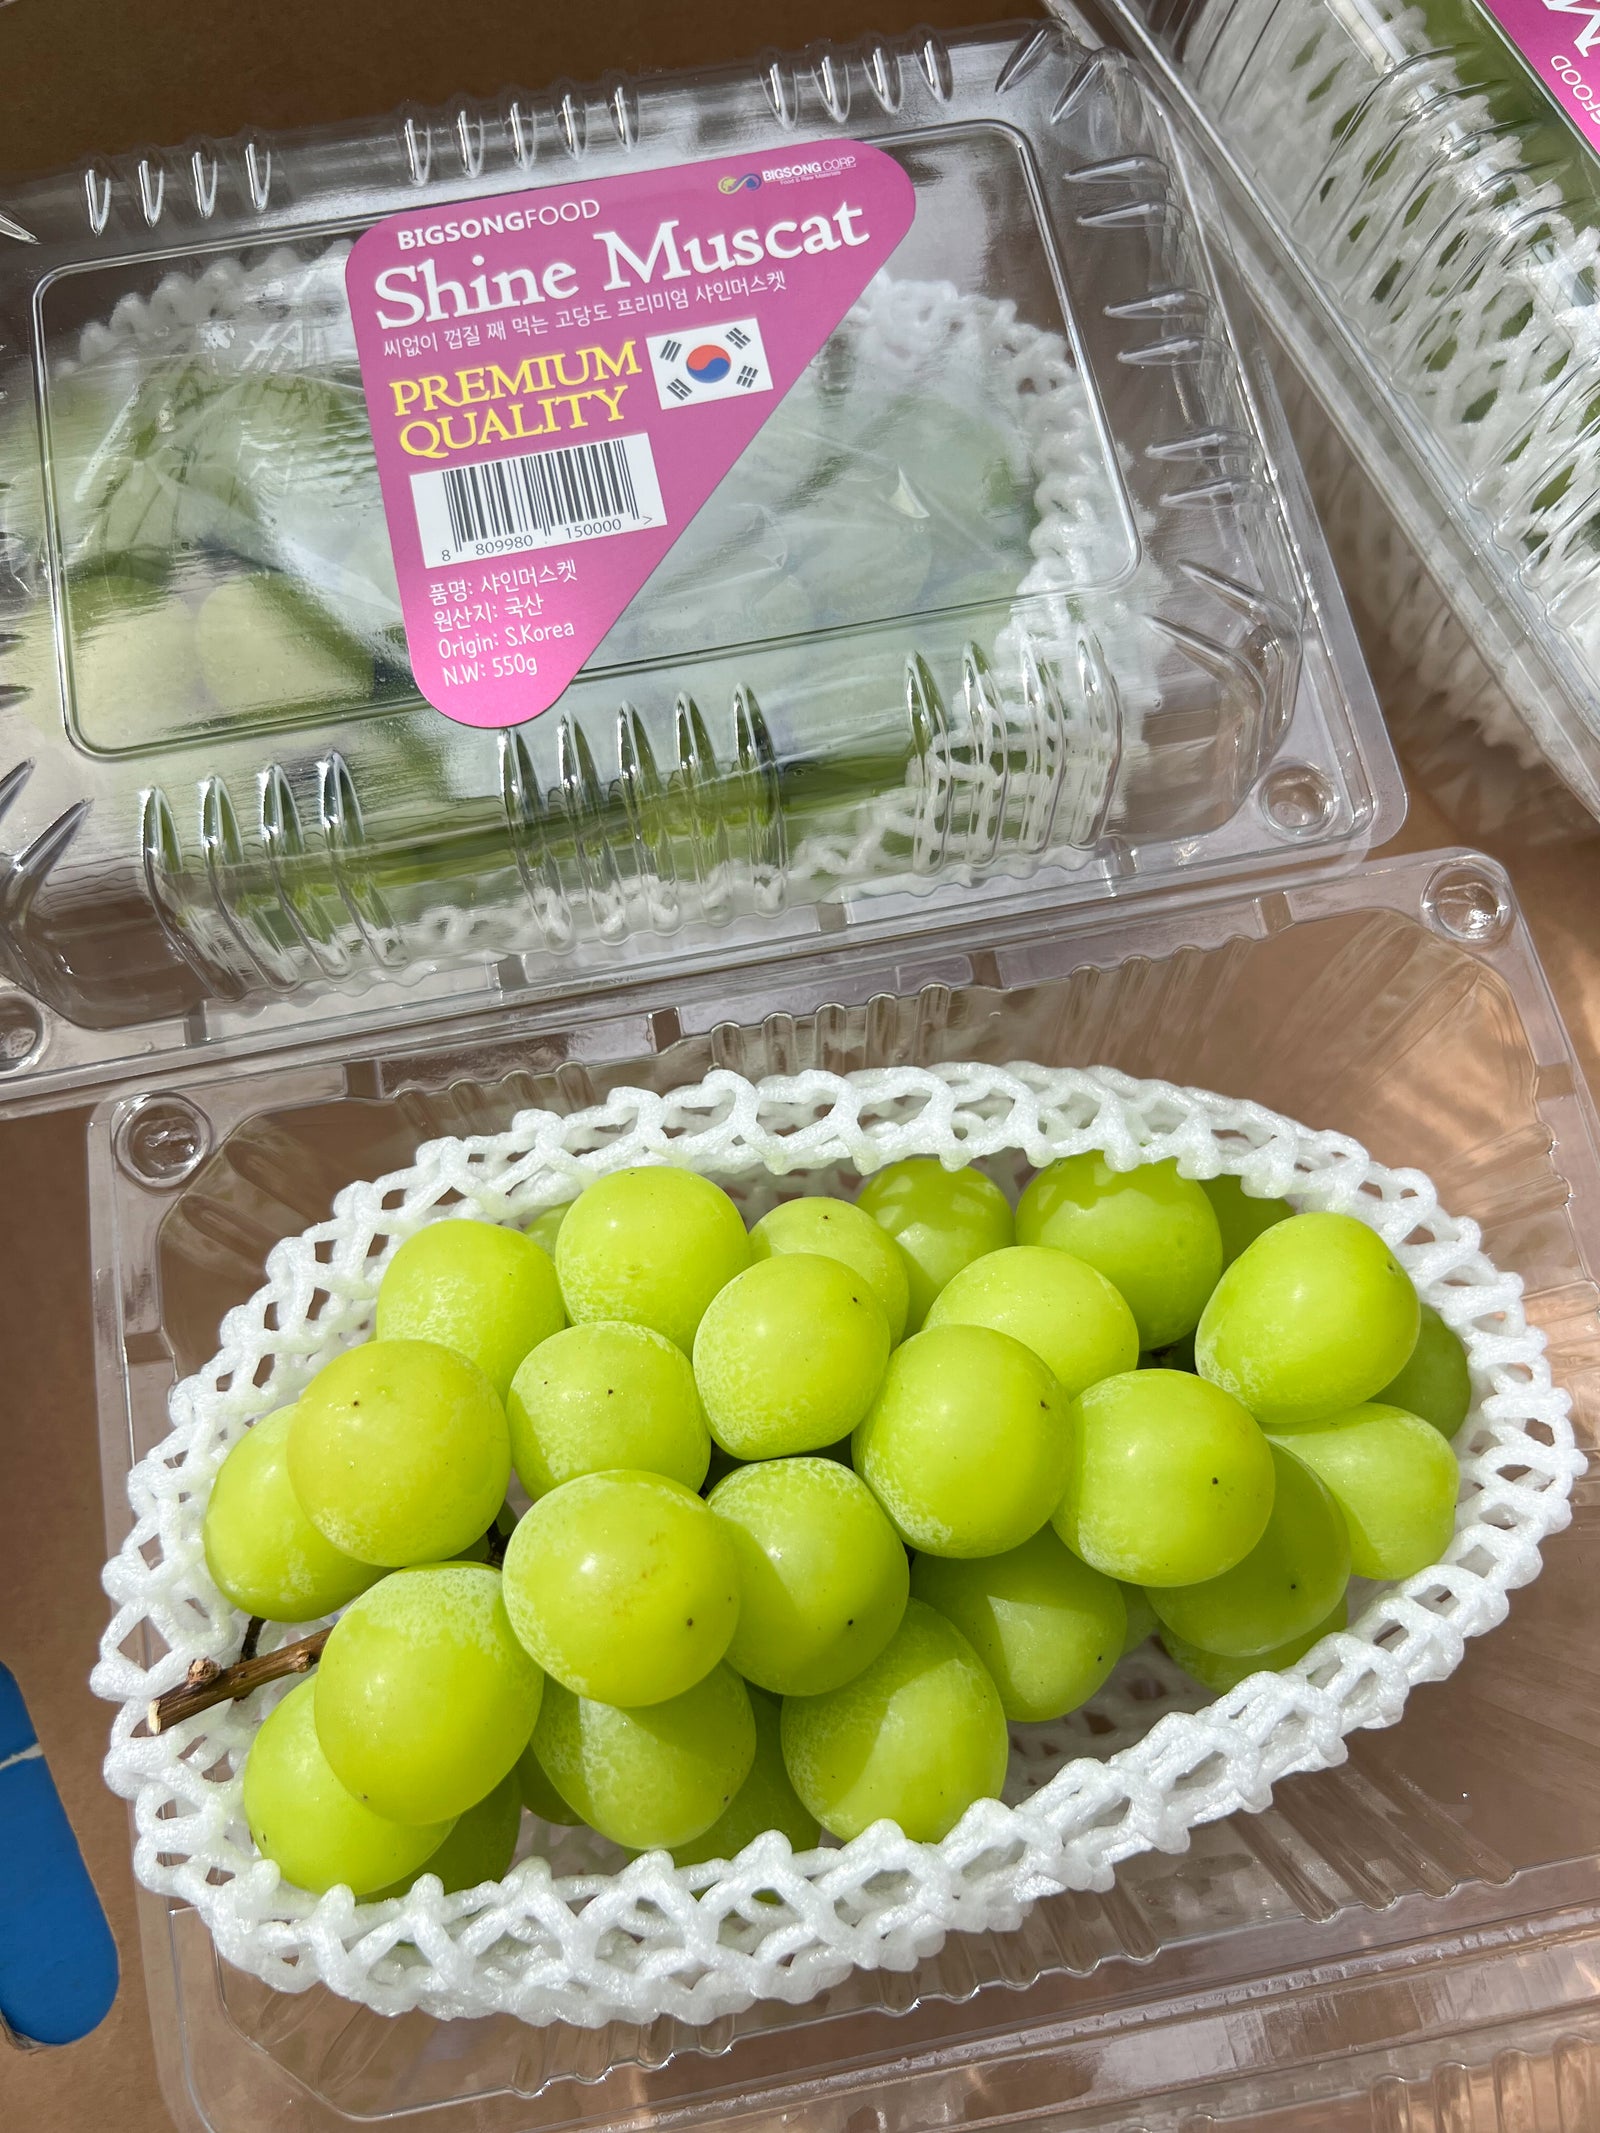 Buy Grapes Green Seedless Premium Imported Pack 250 g Online at